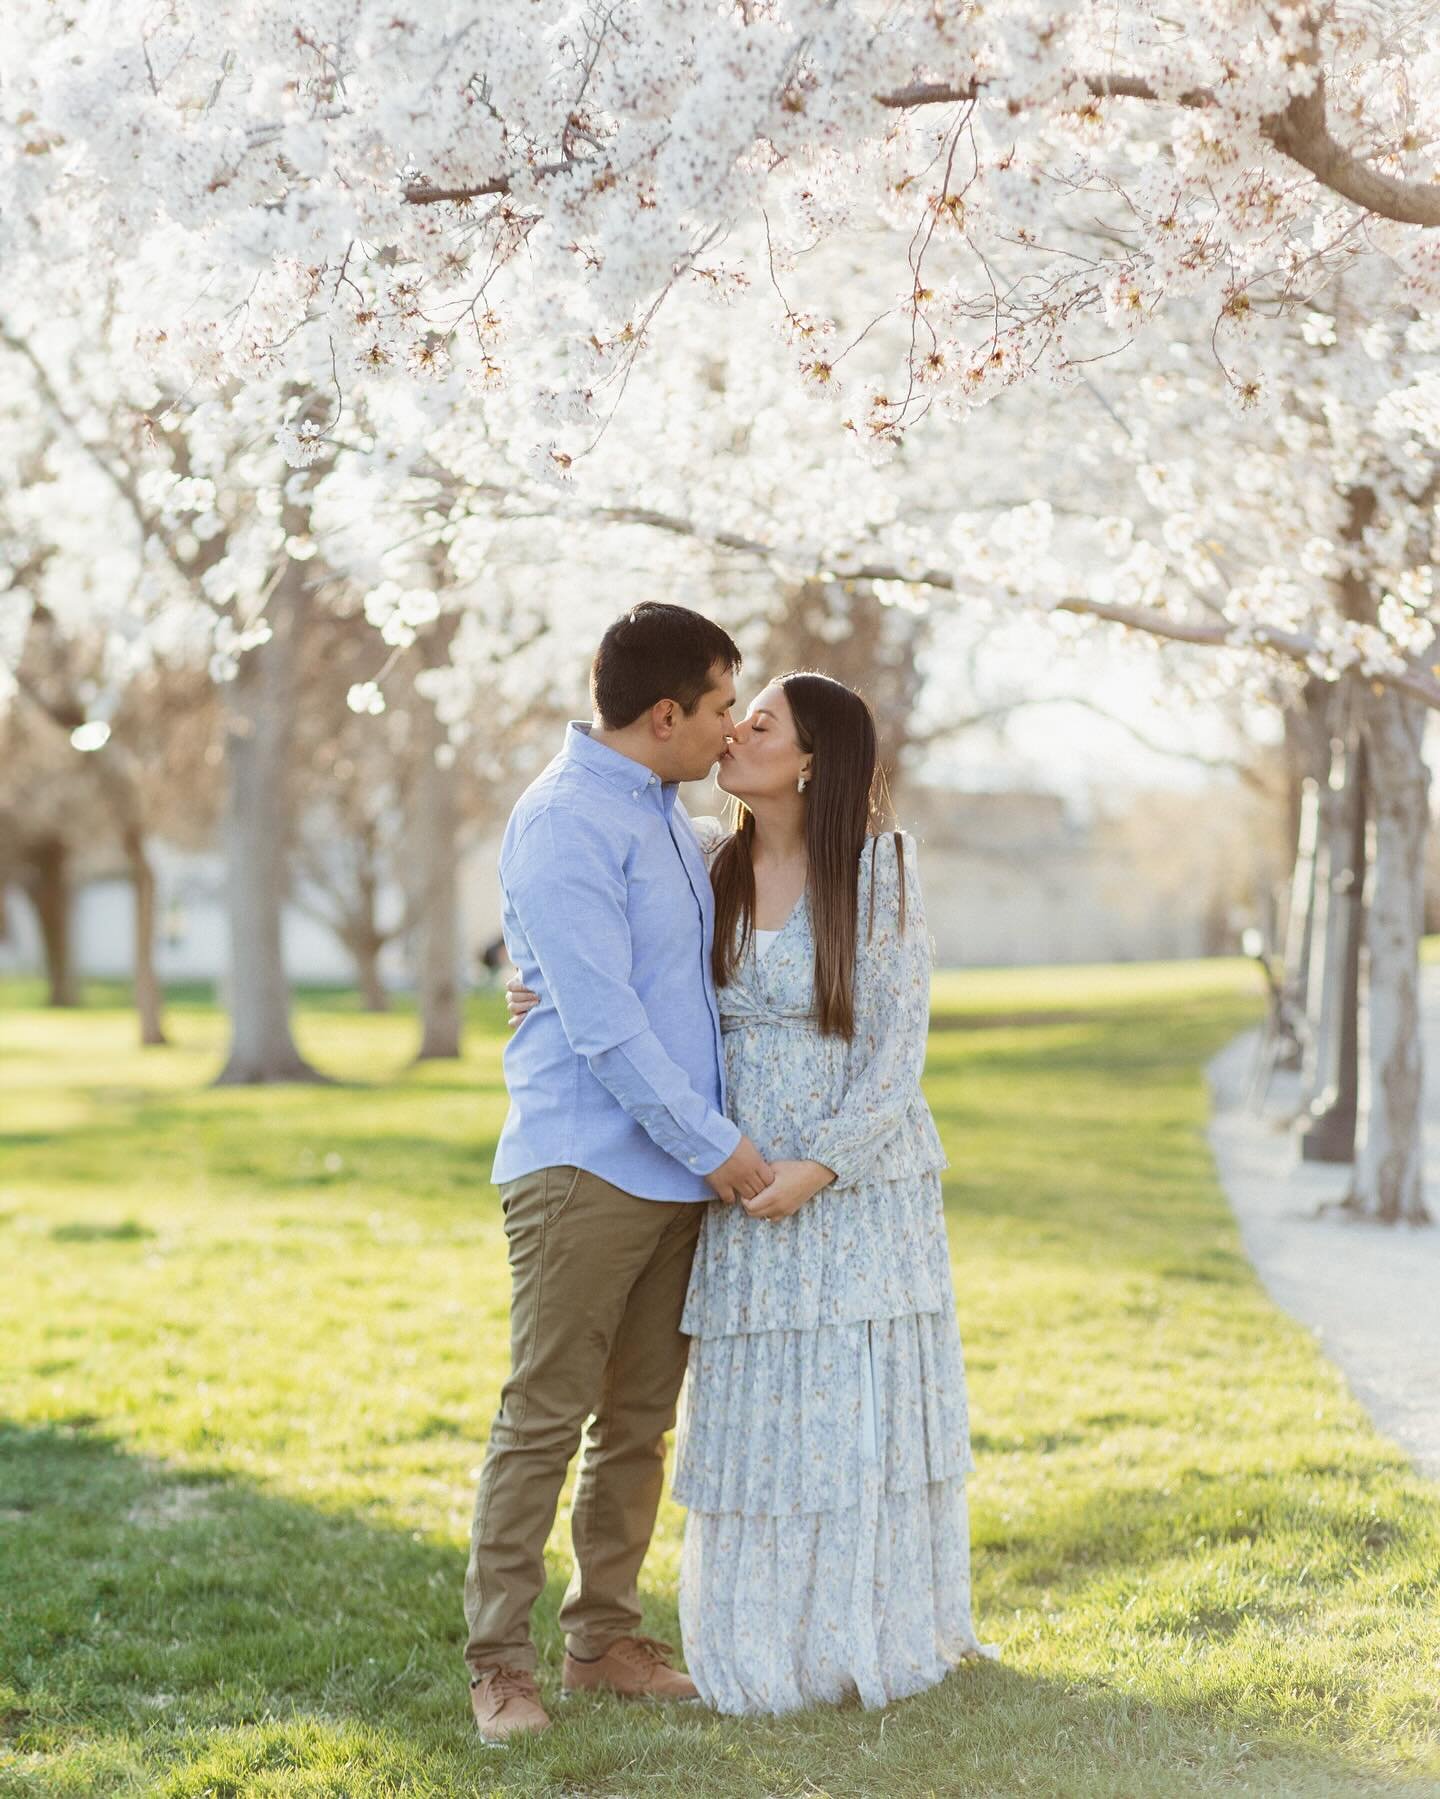 Wife &amp; Mother under the softest light on spring afternoon #mothersday #cherryblossom #utahphotographer